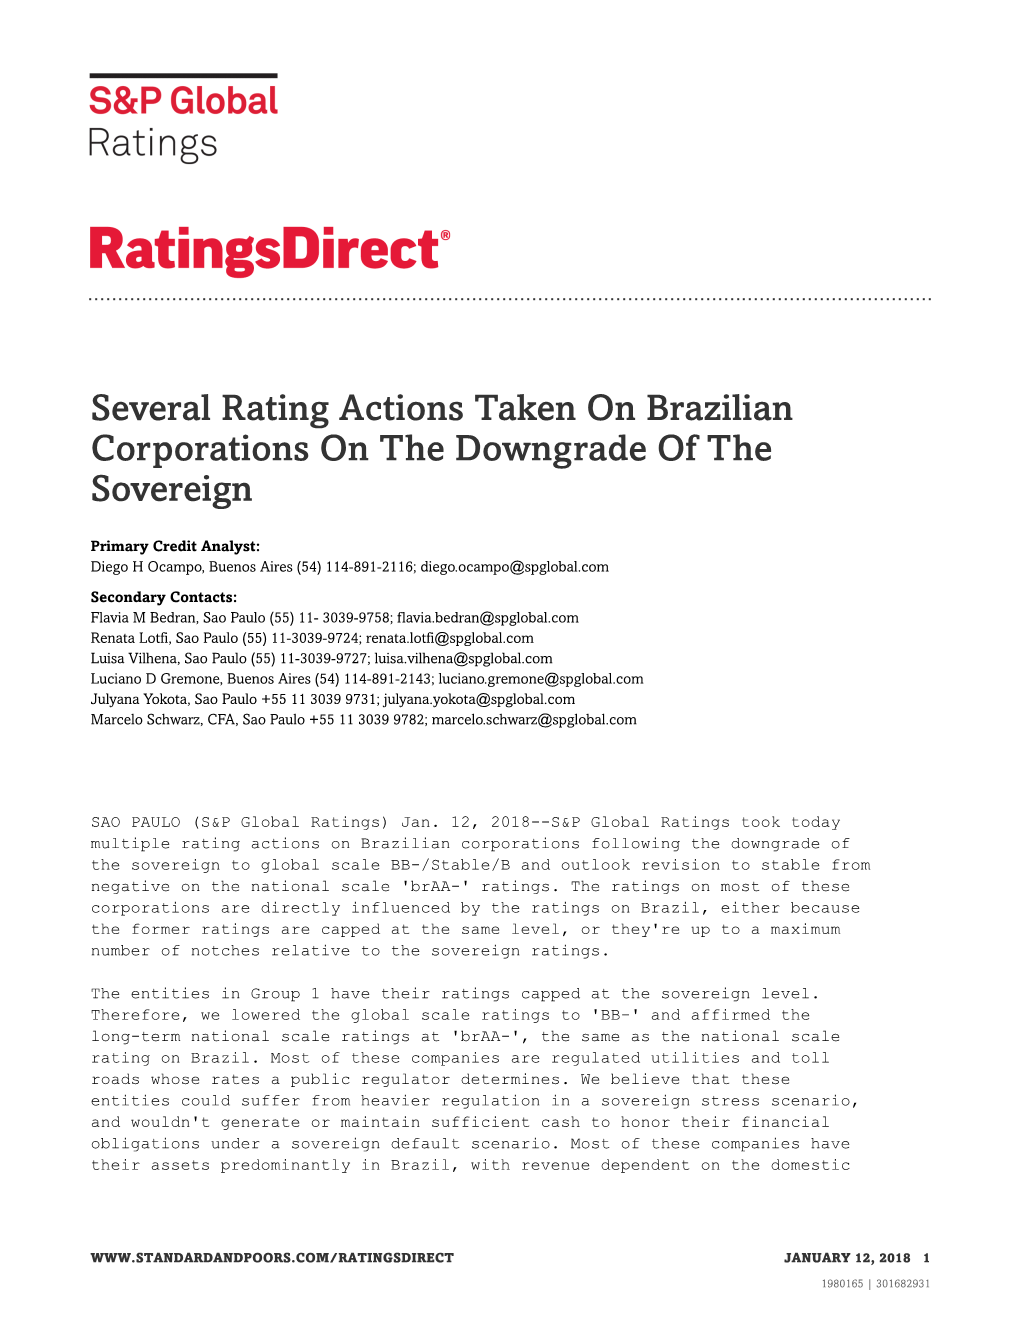 Several Rating Actions Taken on Brazilian Corporations on the Downgrade of the Sovereign